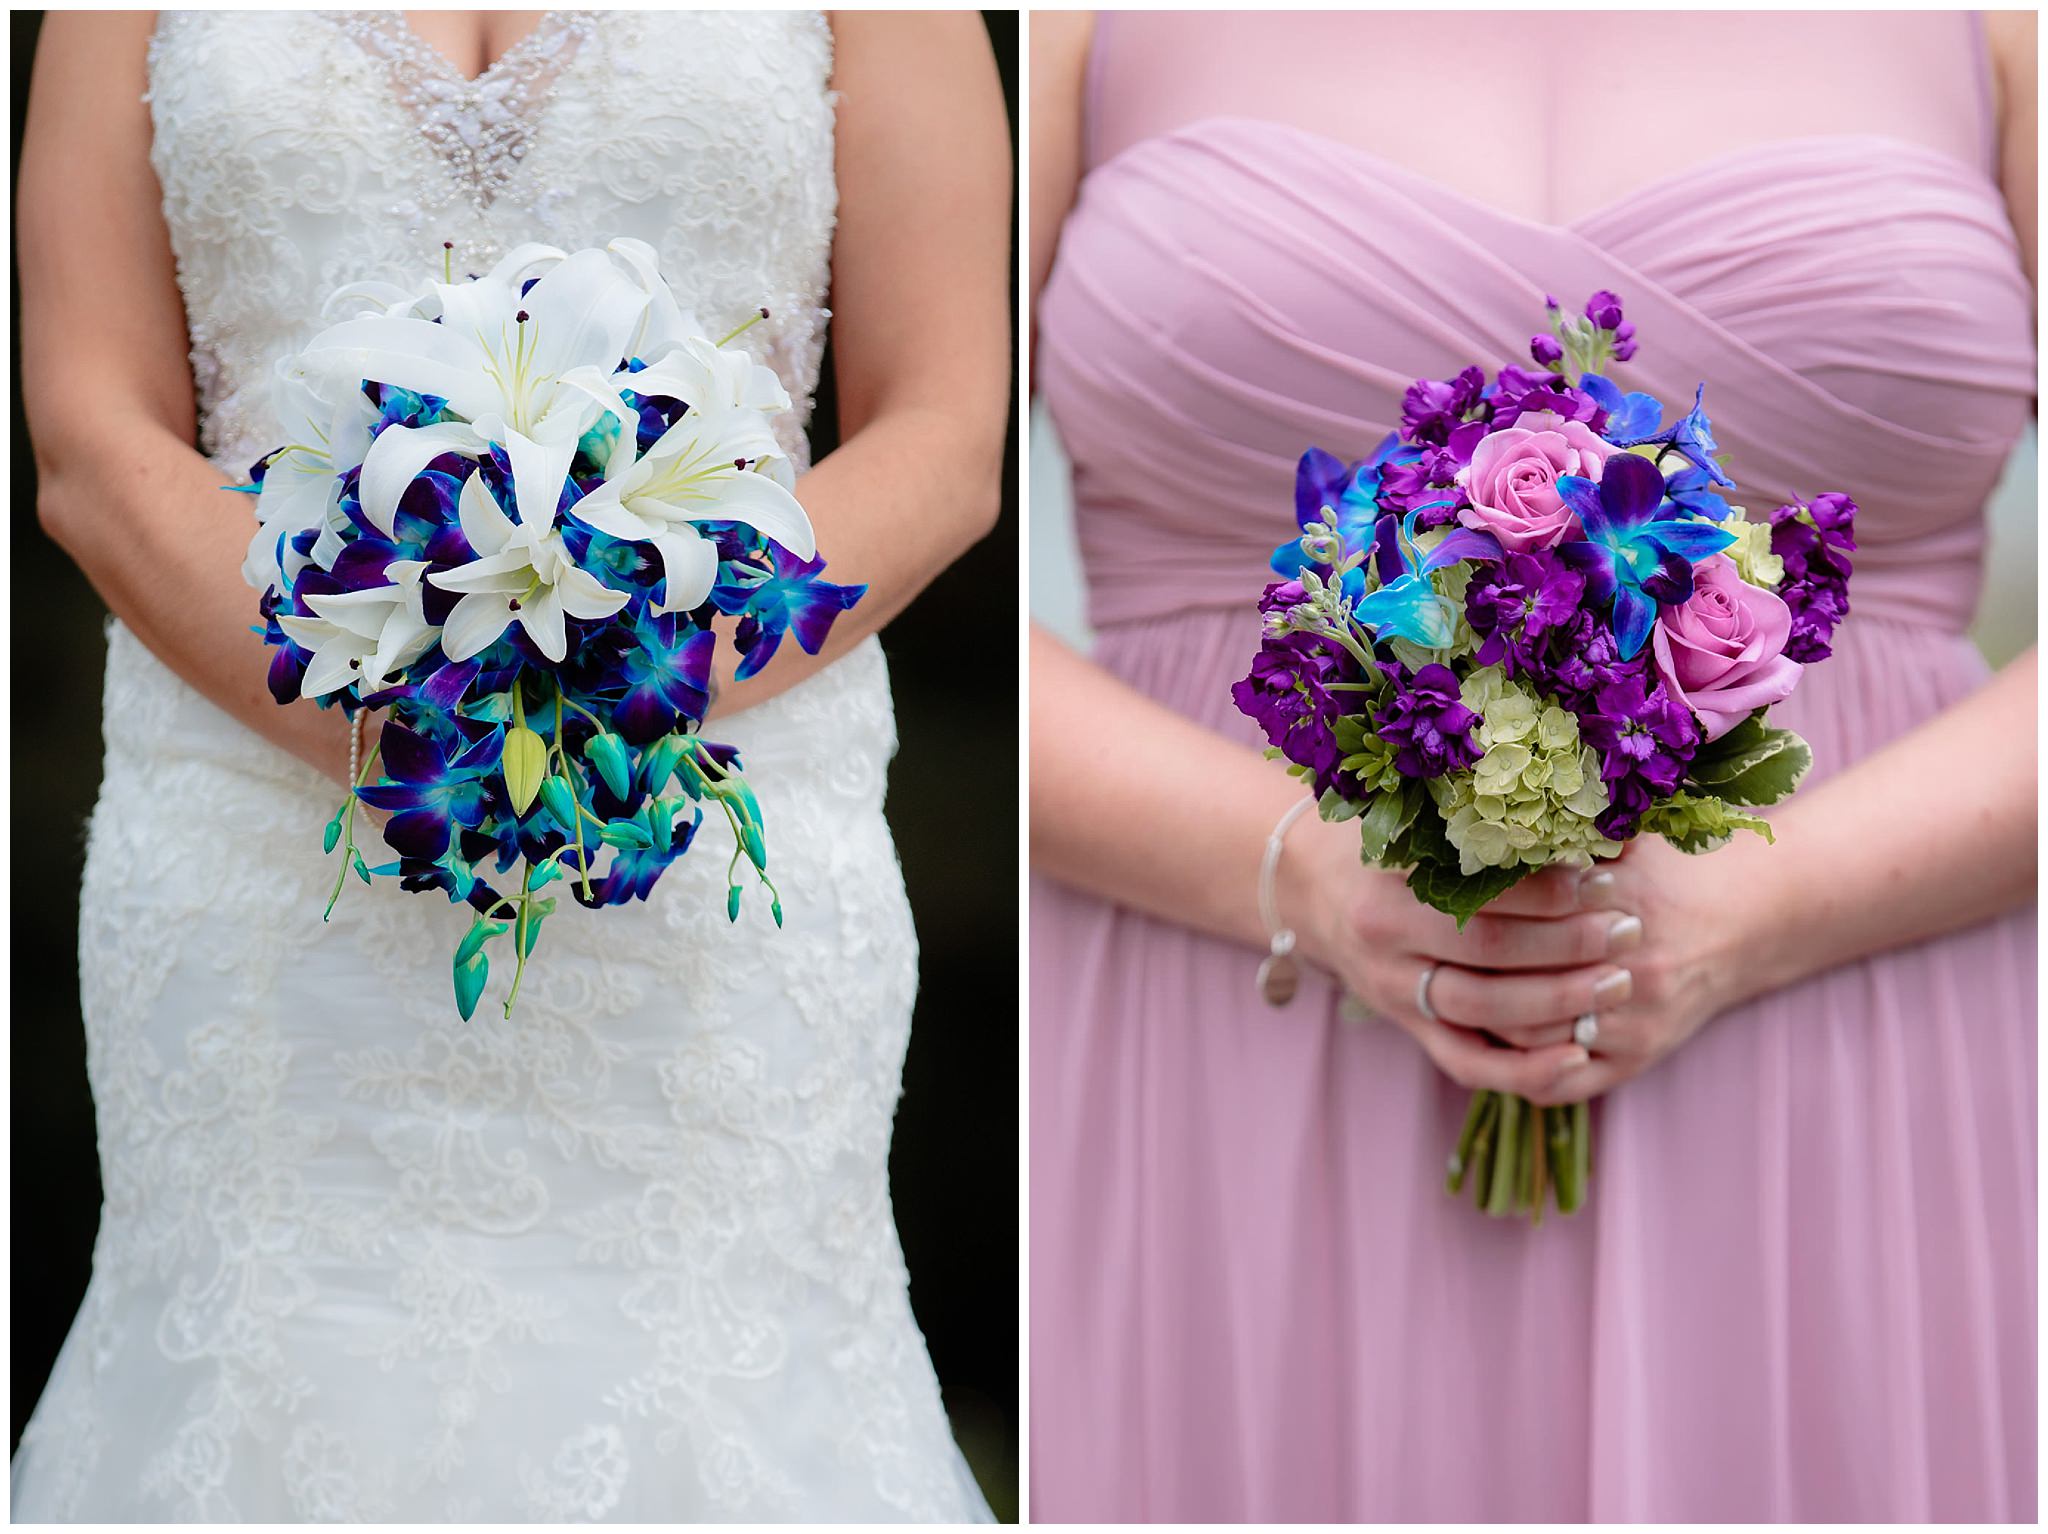 Bride's & bridesmaid's bouquets by One Happy Flower Shop in Pittsburgh, PA